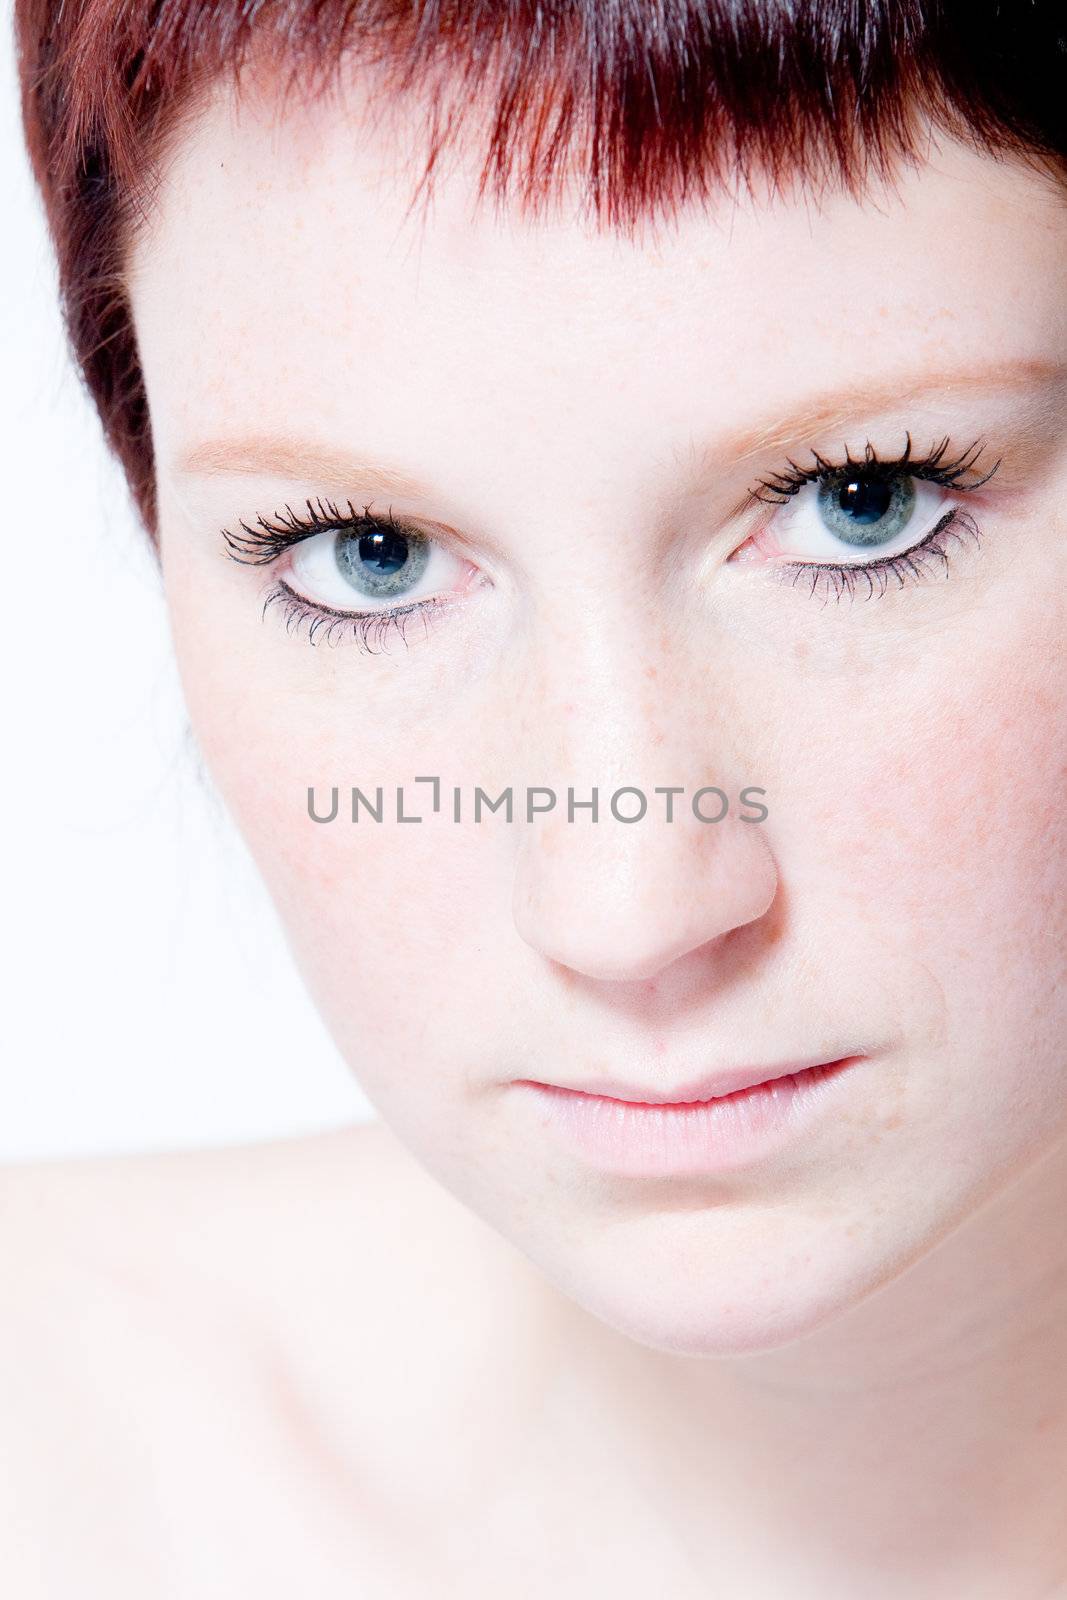 Studio portrait of a young woman with short hair making eye contact